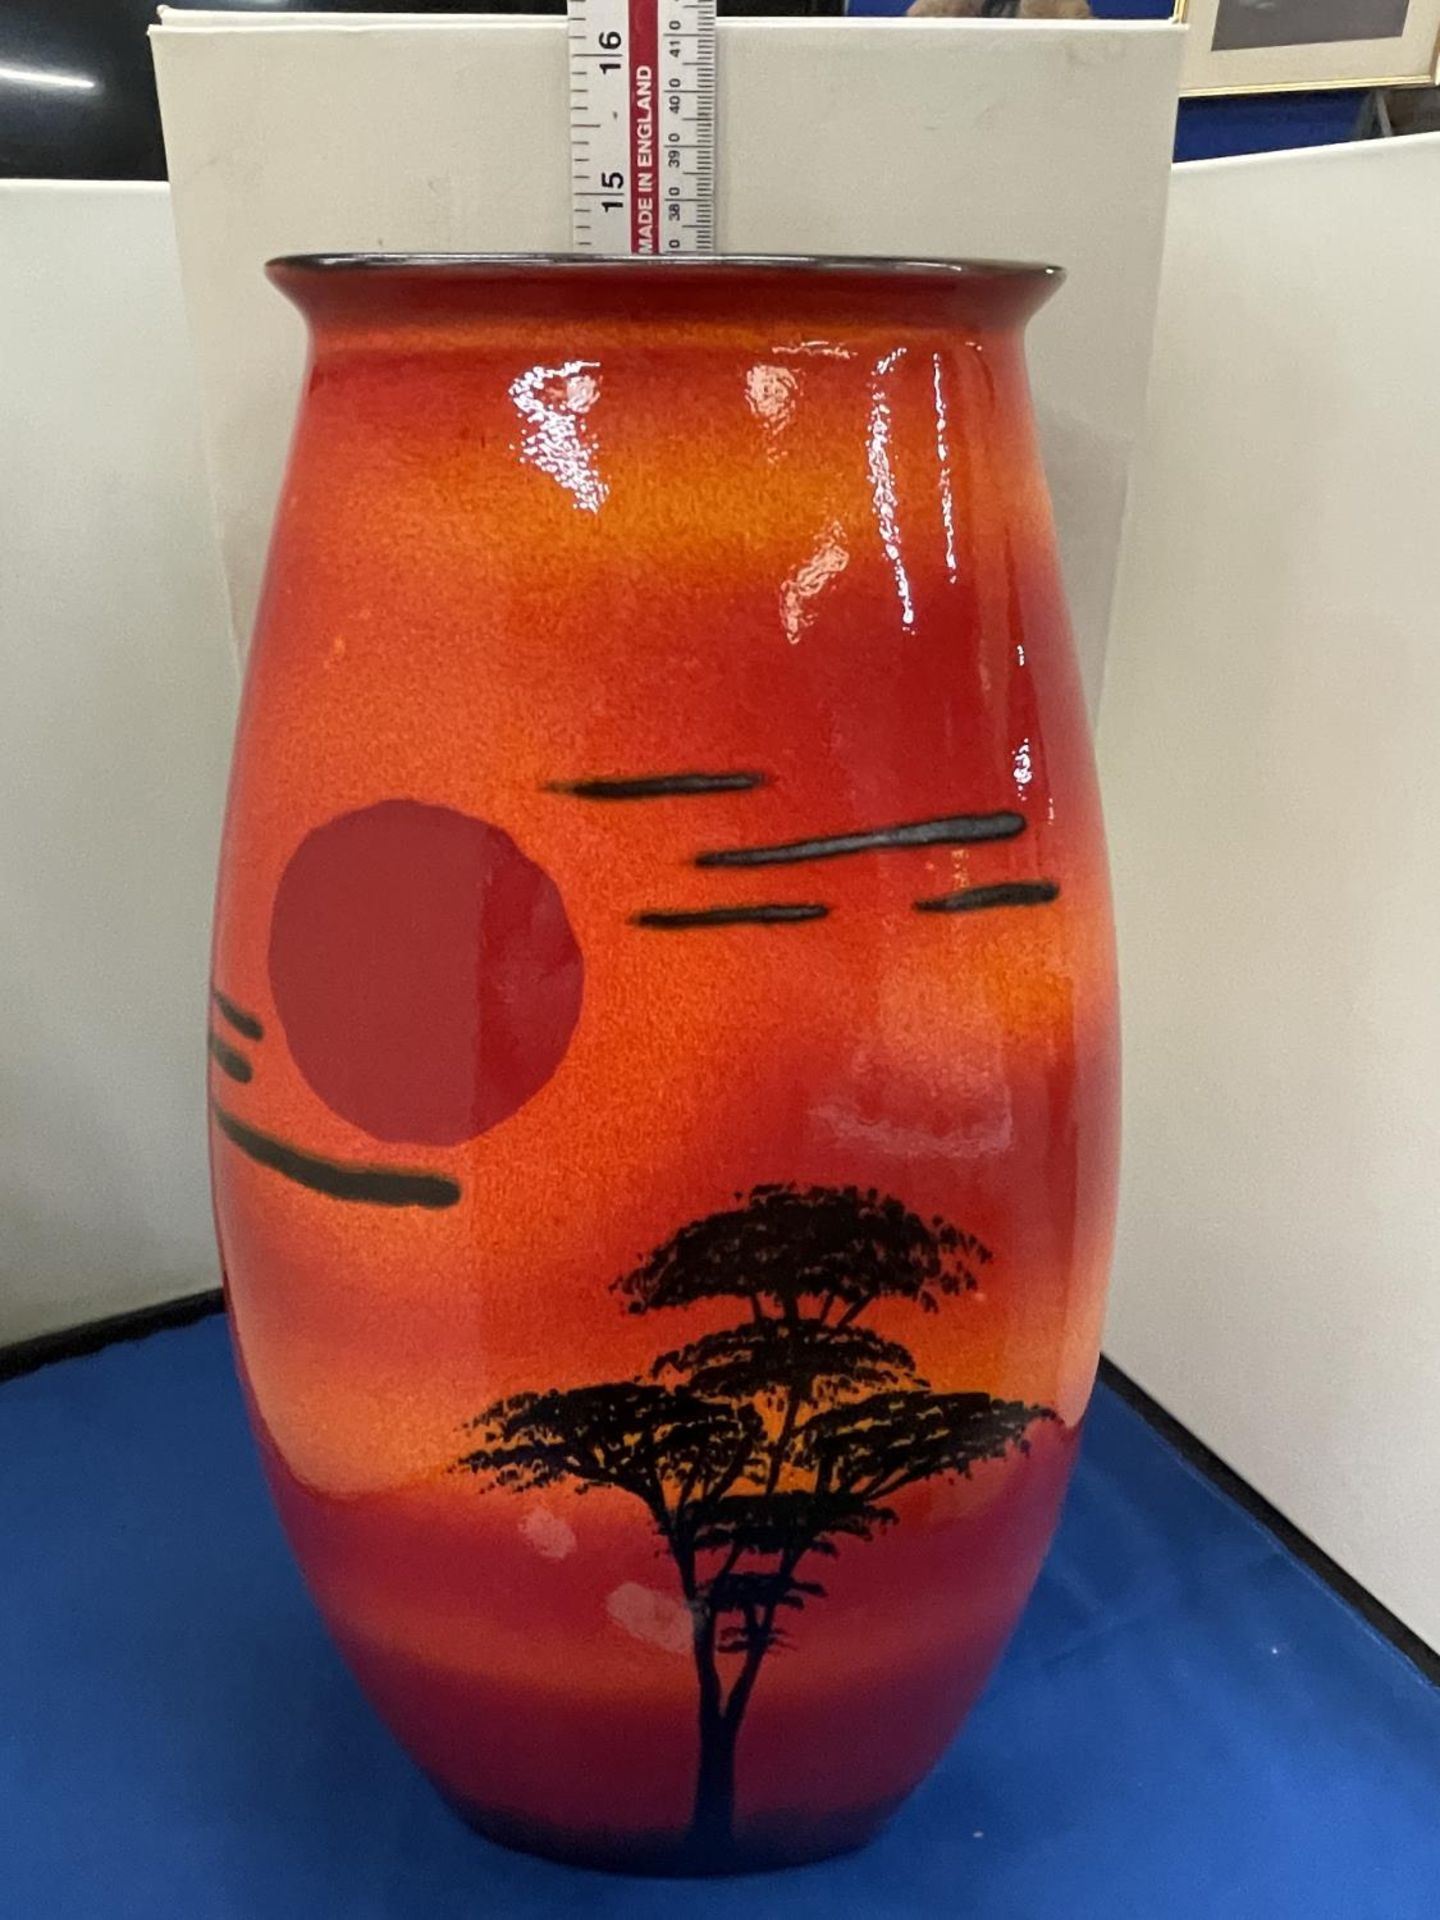 A POOLE POTTERY MANHATTON VASE WITH AFRICAN SKY DESIGN 36CM TALL WITH ORIGINAL BOX - Image 10 of 10